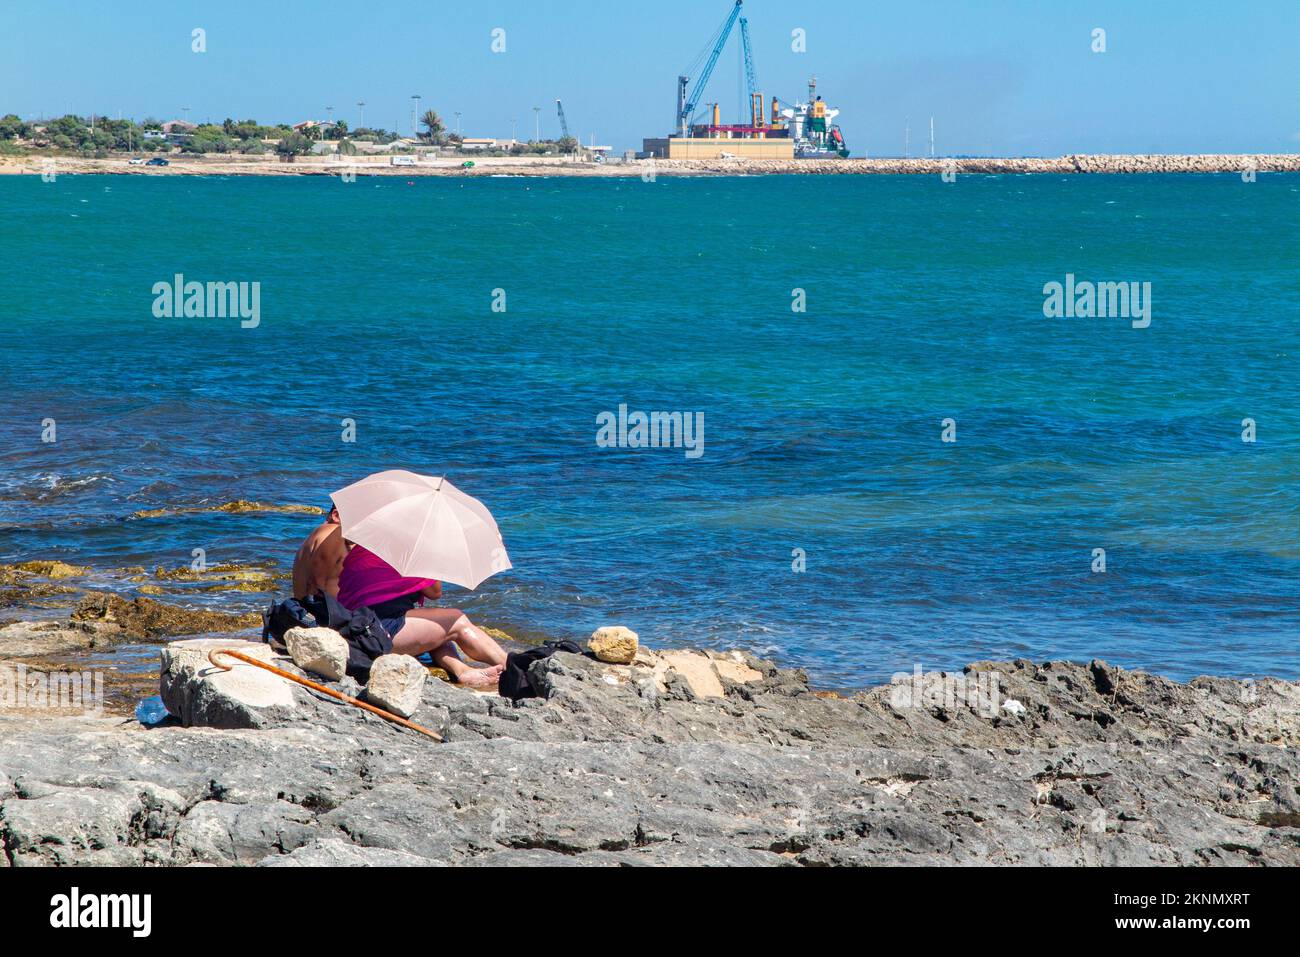 A retired couple hide from the sun under a beach umbrella in an induistrial scene Stock Photo